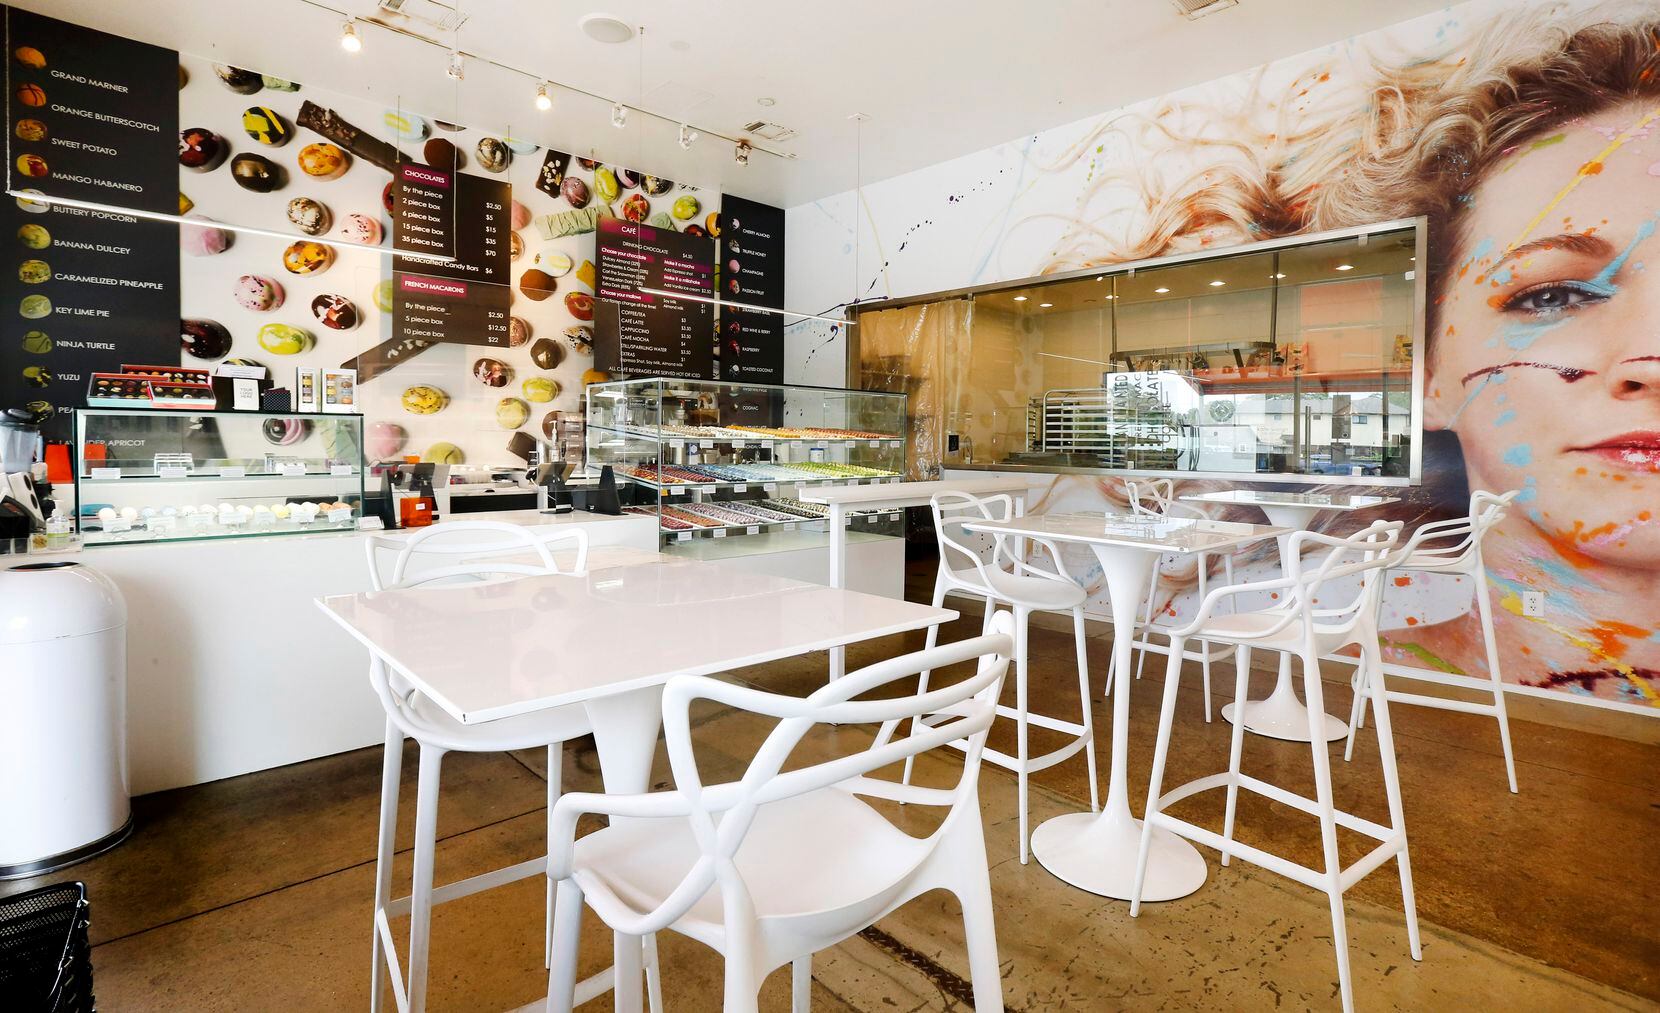 An interior view of Kate Weiser Chocolate's Trinity Groves location in Dallas.